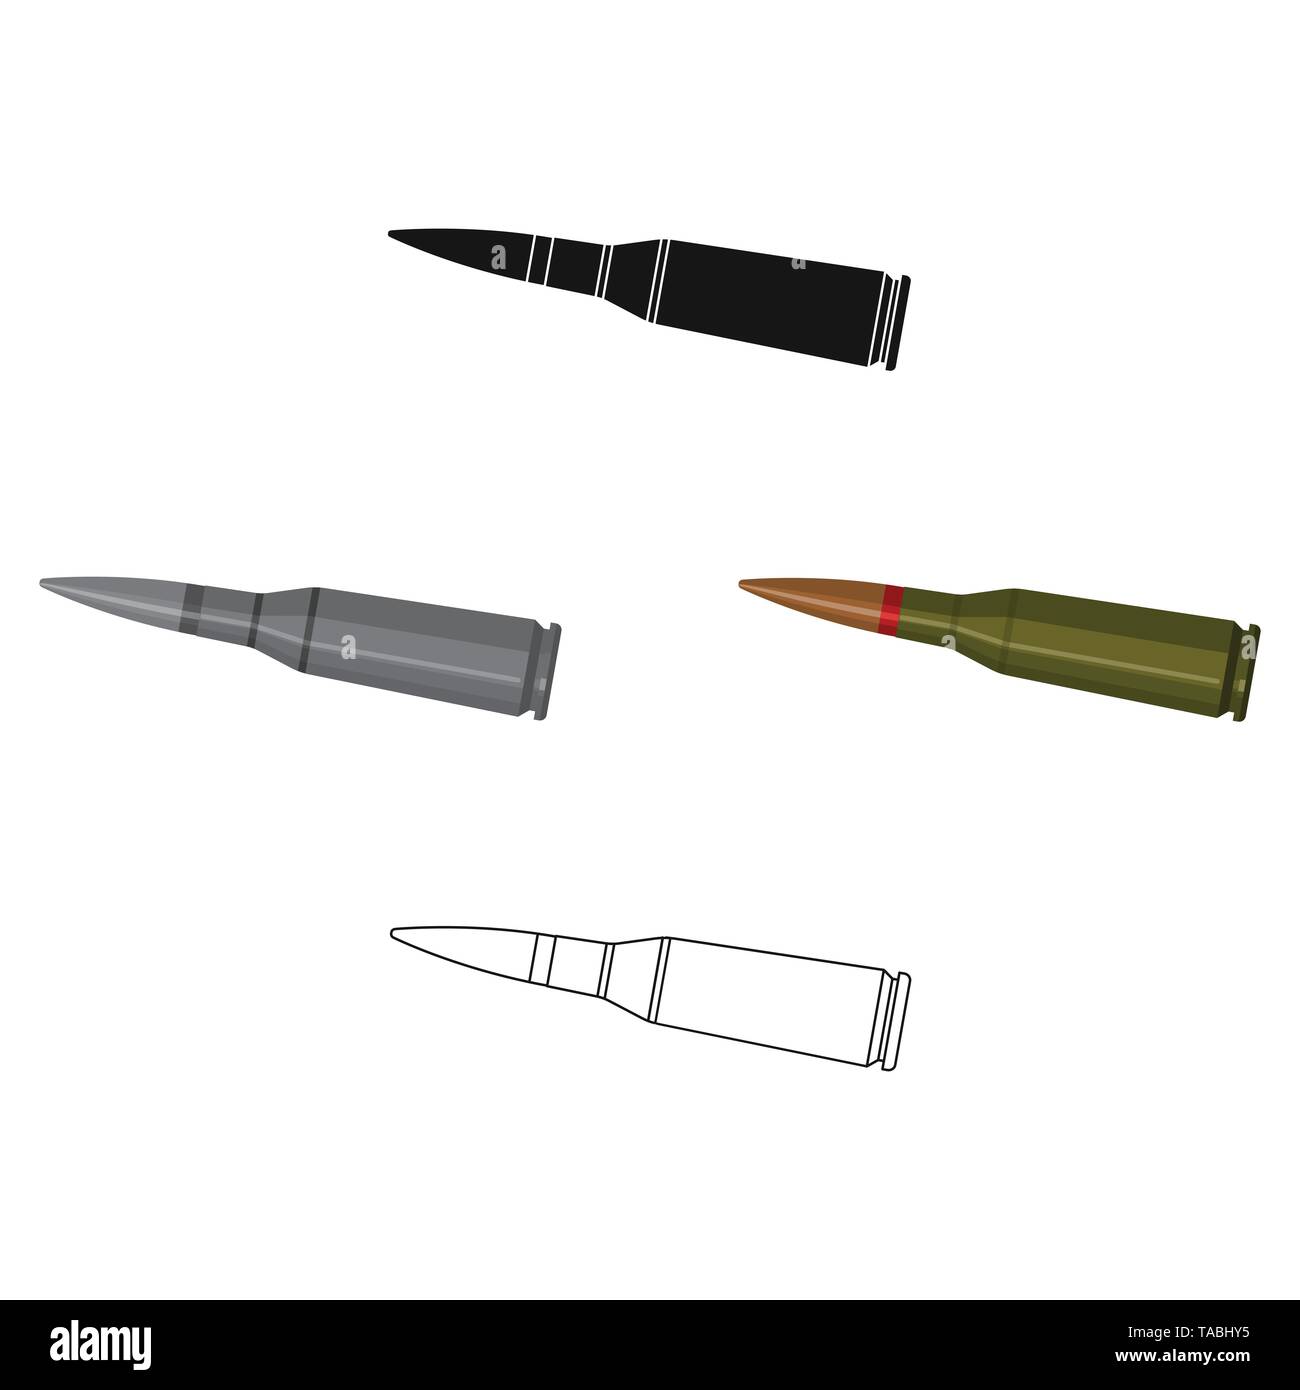 ammo,ammunition,armed,army,art,background,bullet,cartoon,black,closeup,conflict,danger,dangerous,design,gun,hunting,icon,illustration,isolated,jacket,logo,macro,metal,military,murder,power,protection,rifle,round,shiny,strength,symbol,vector,violence  ...